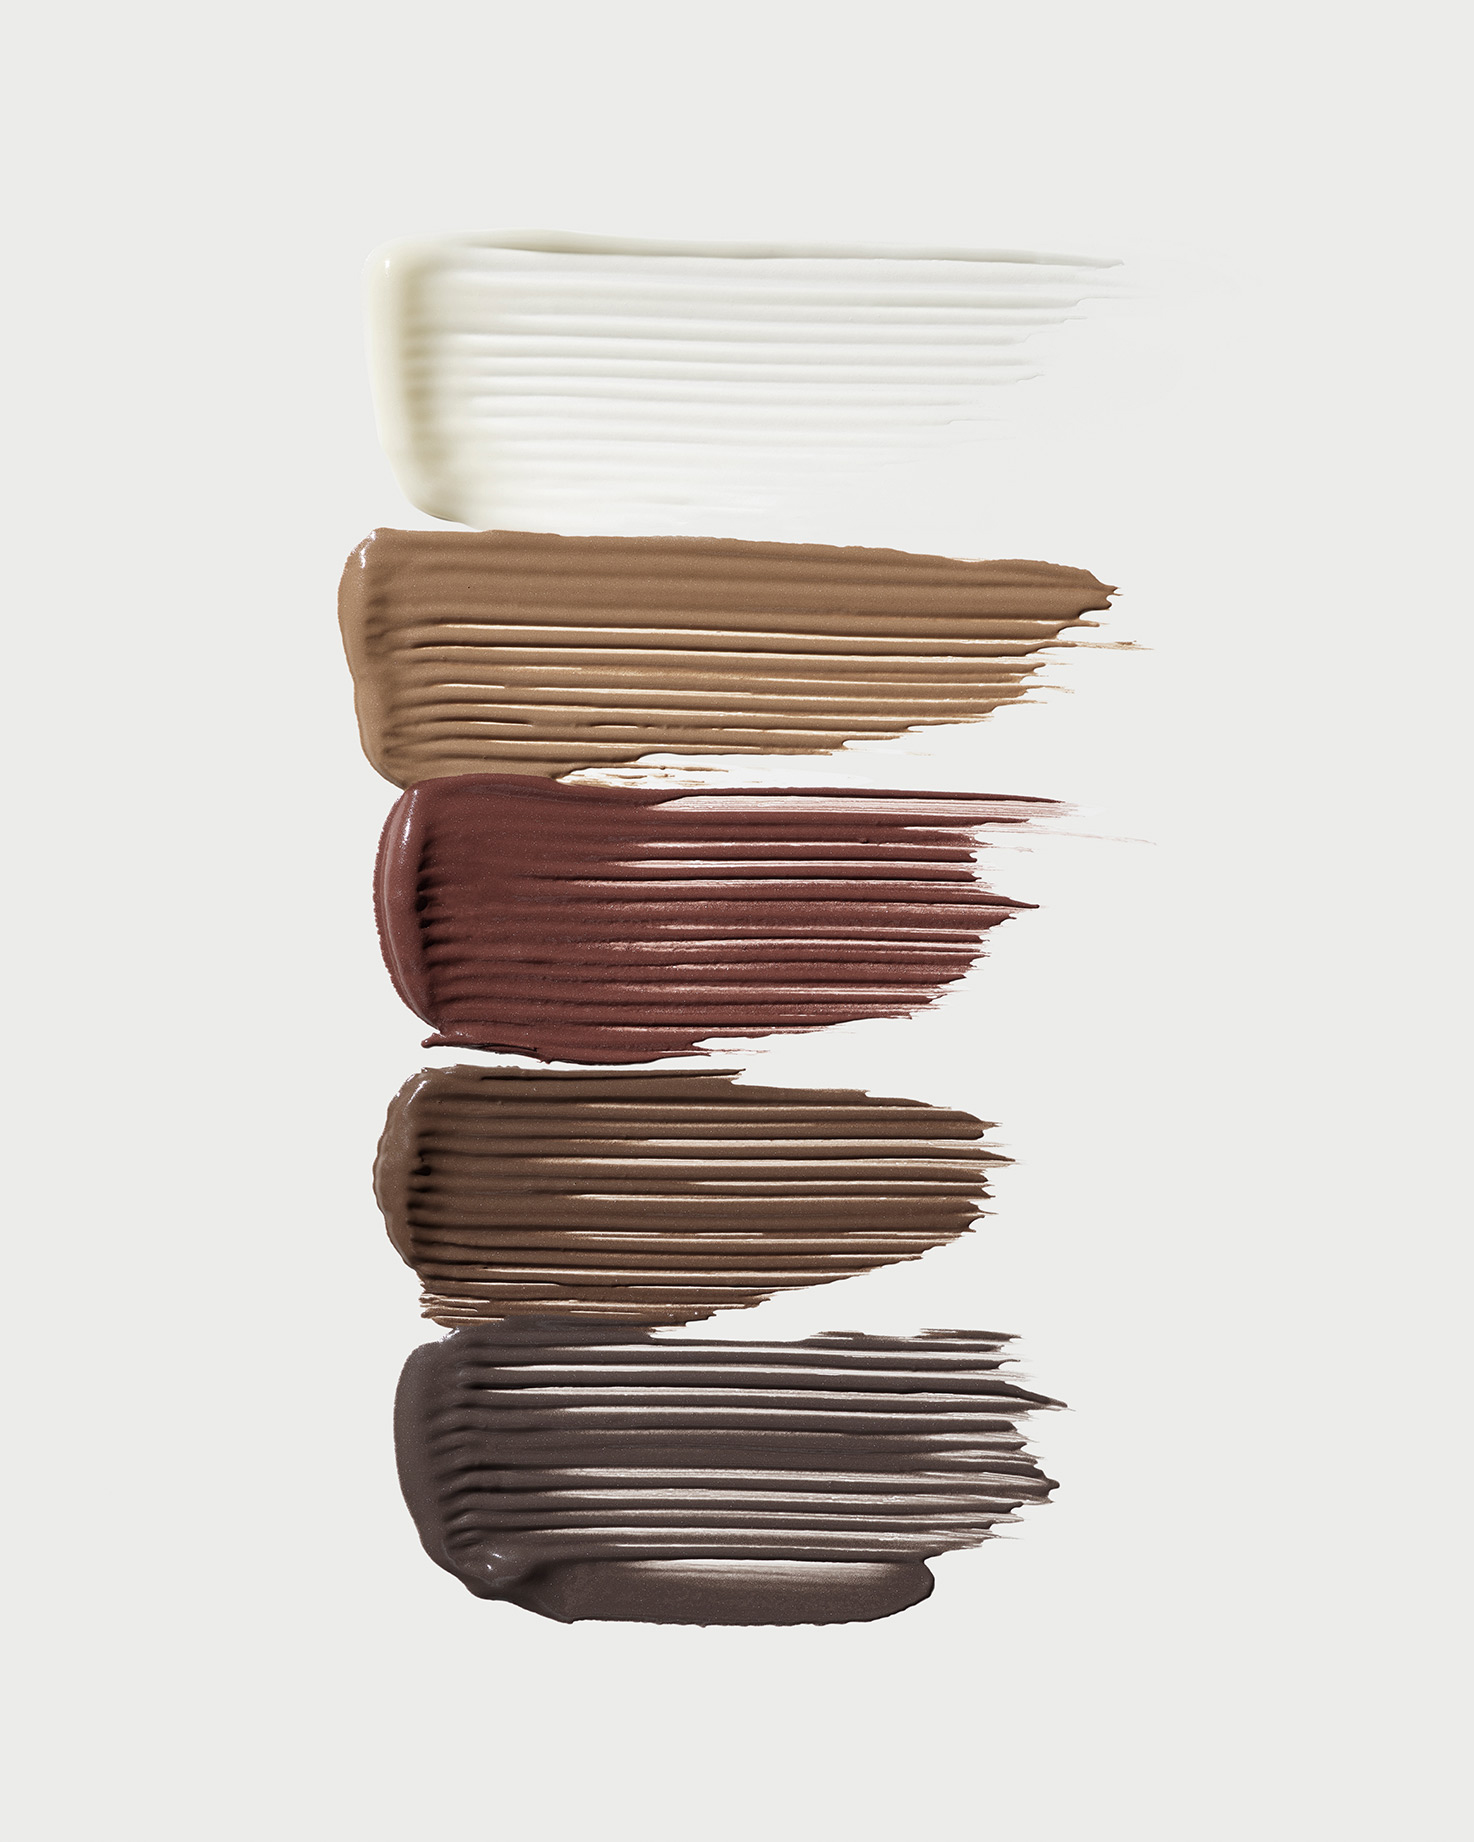 Product swatch of the 5 shades of Brow Renew Enriched Clear Shaping Gel